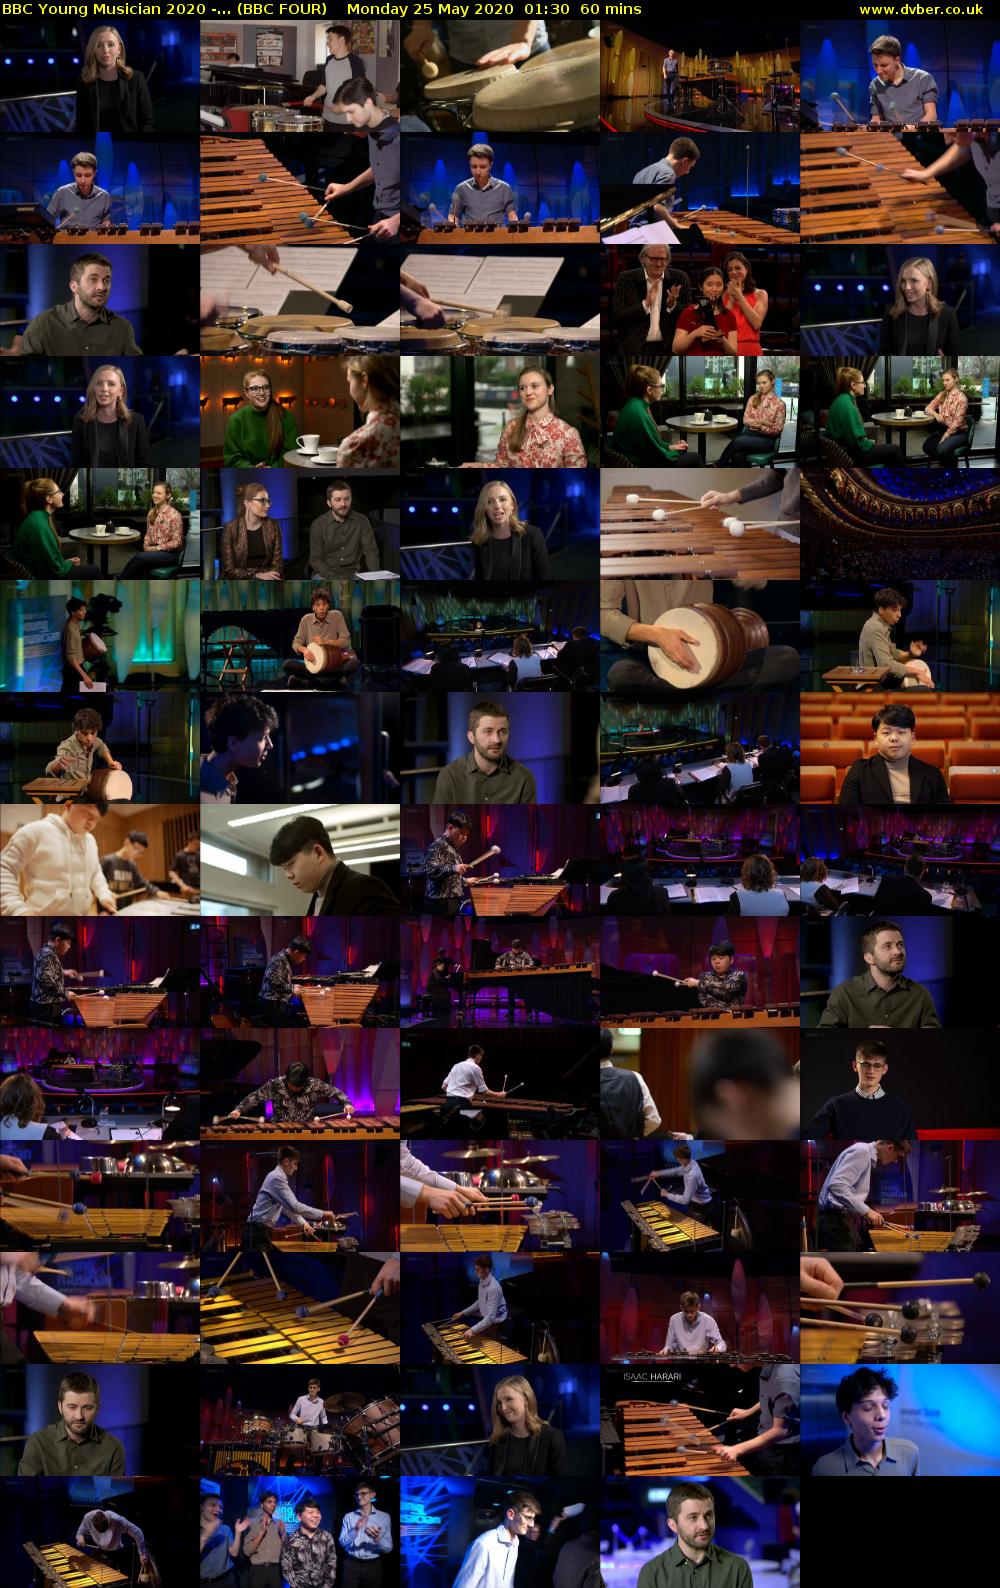 BBC Young Musician 2020 -... (BBC FOUR) Monday 25 May 2020 01:30 - 02:30